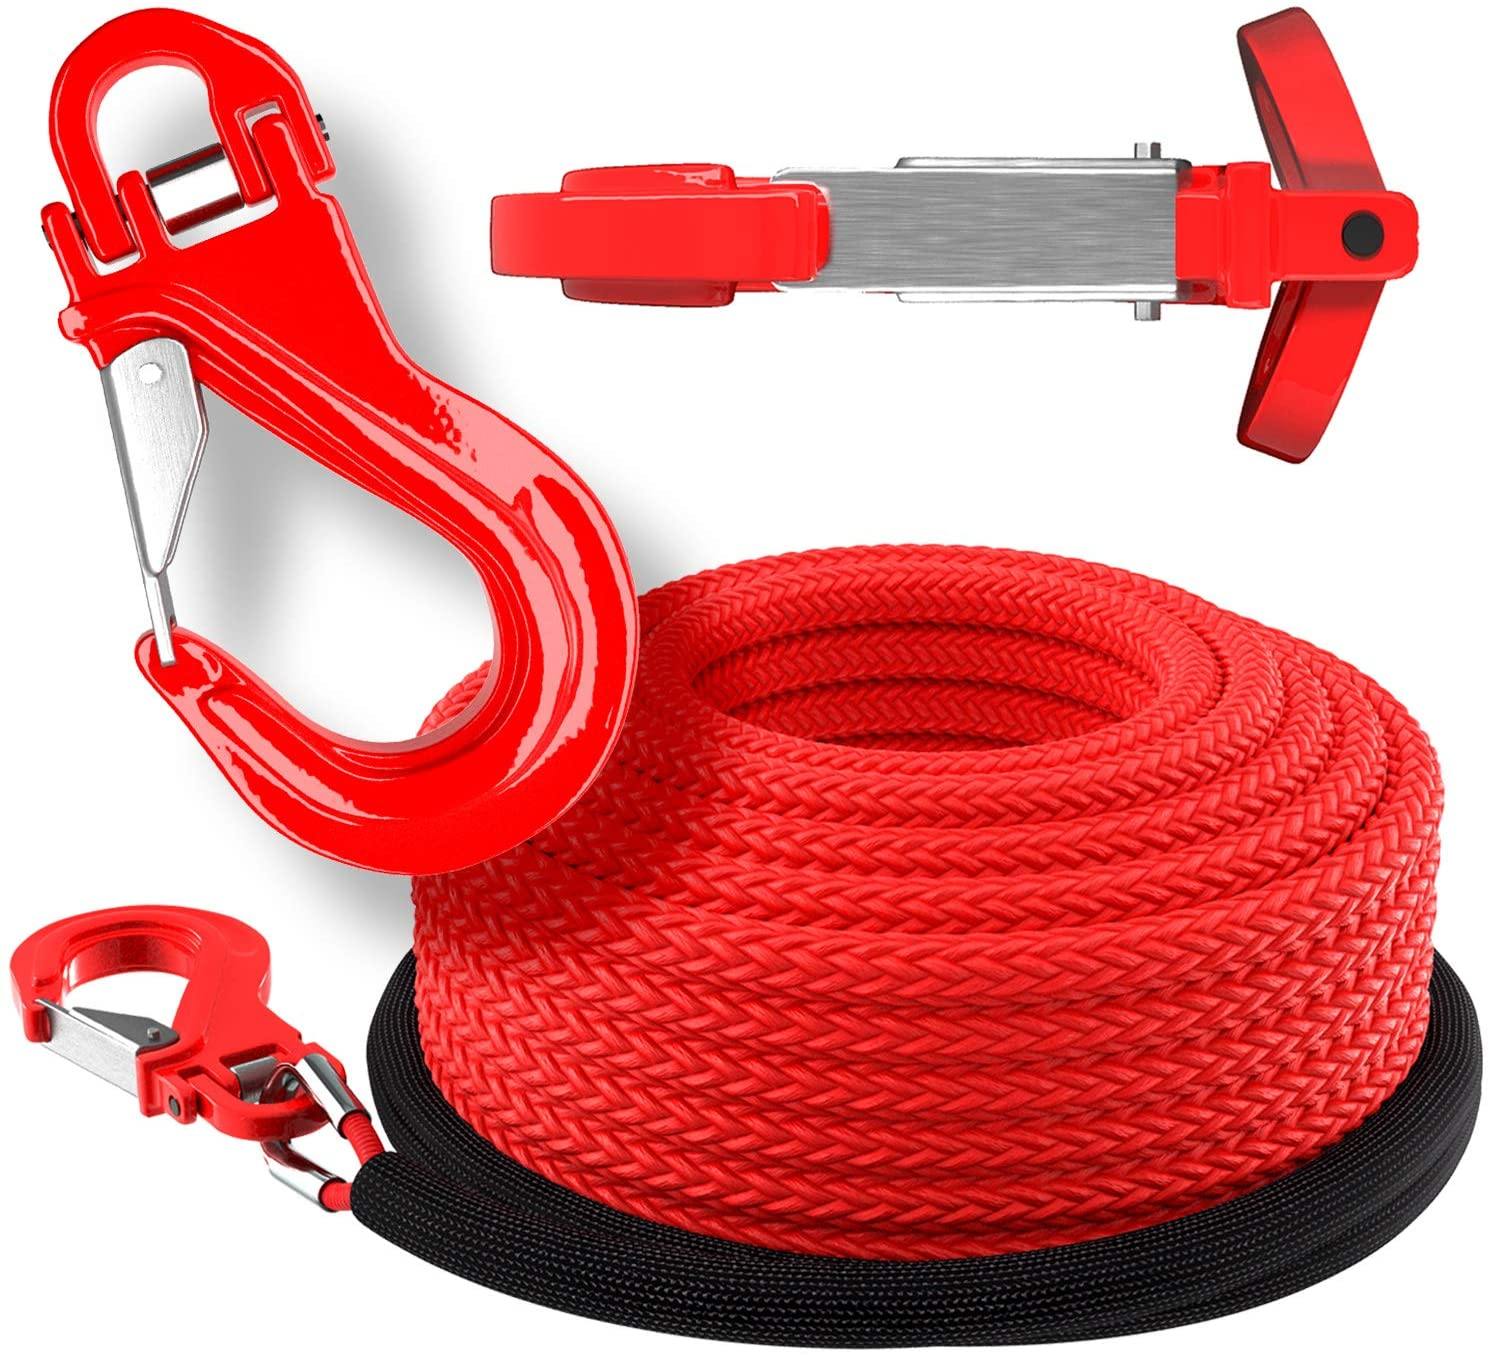 with rope with hook, off road, recovery Gear, kinetic energy, atv, utv